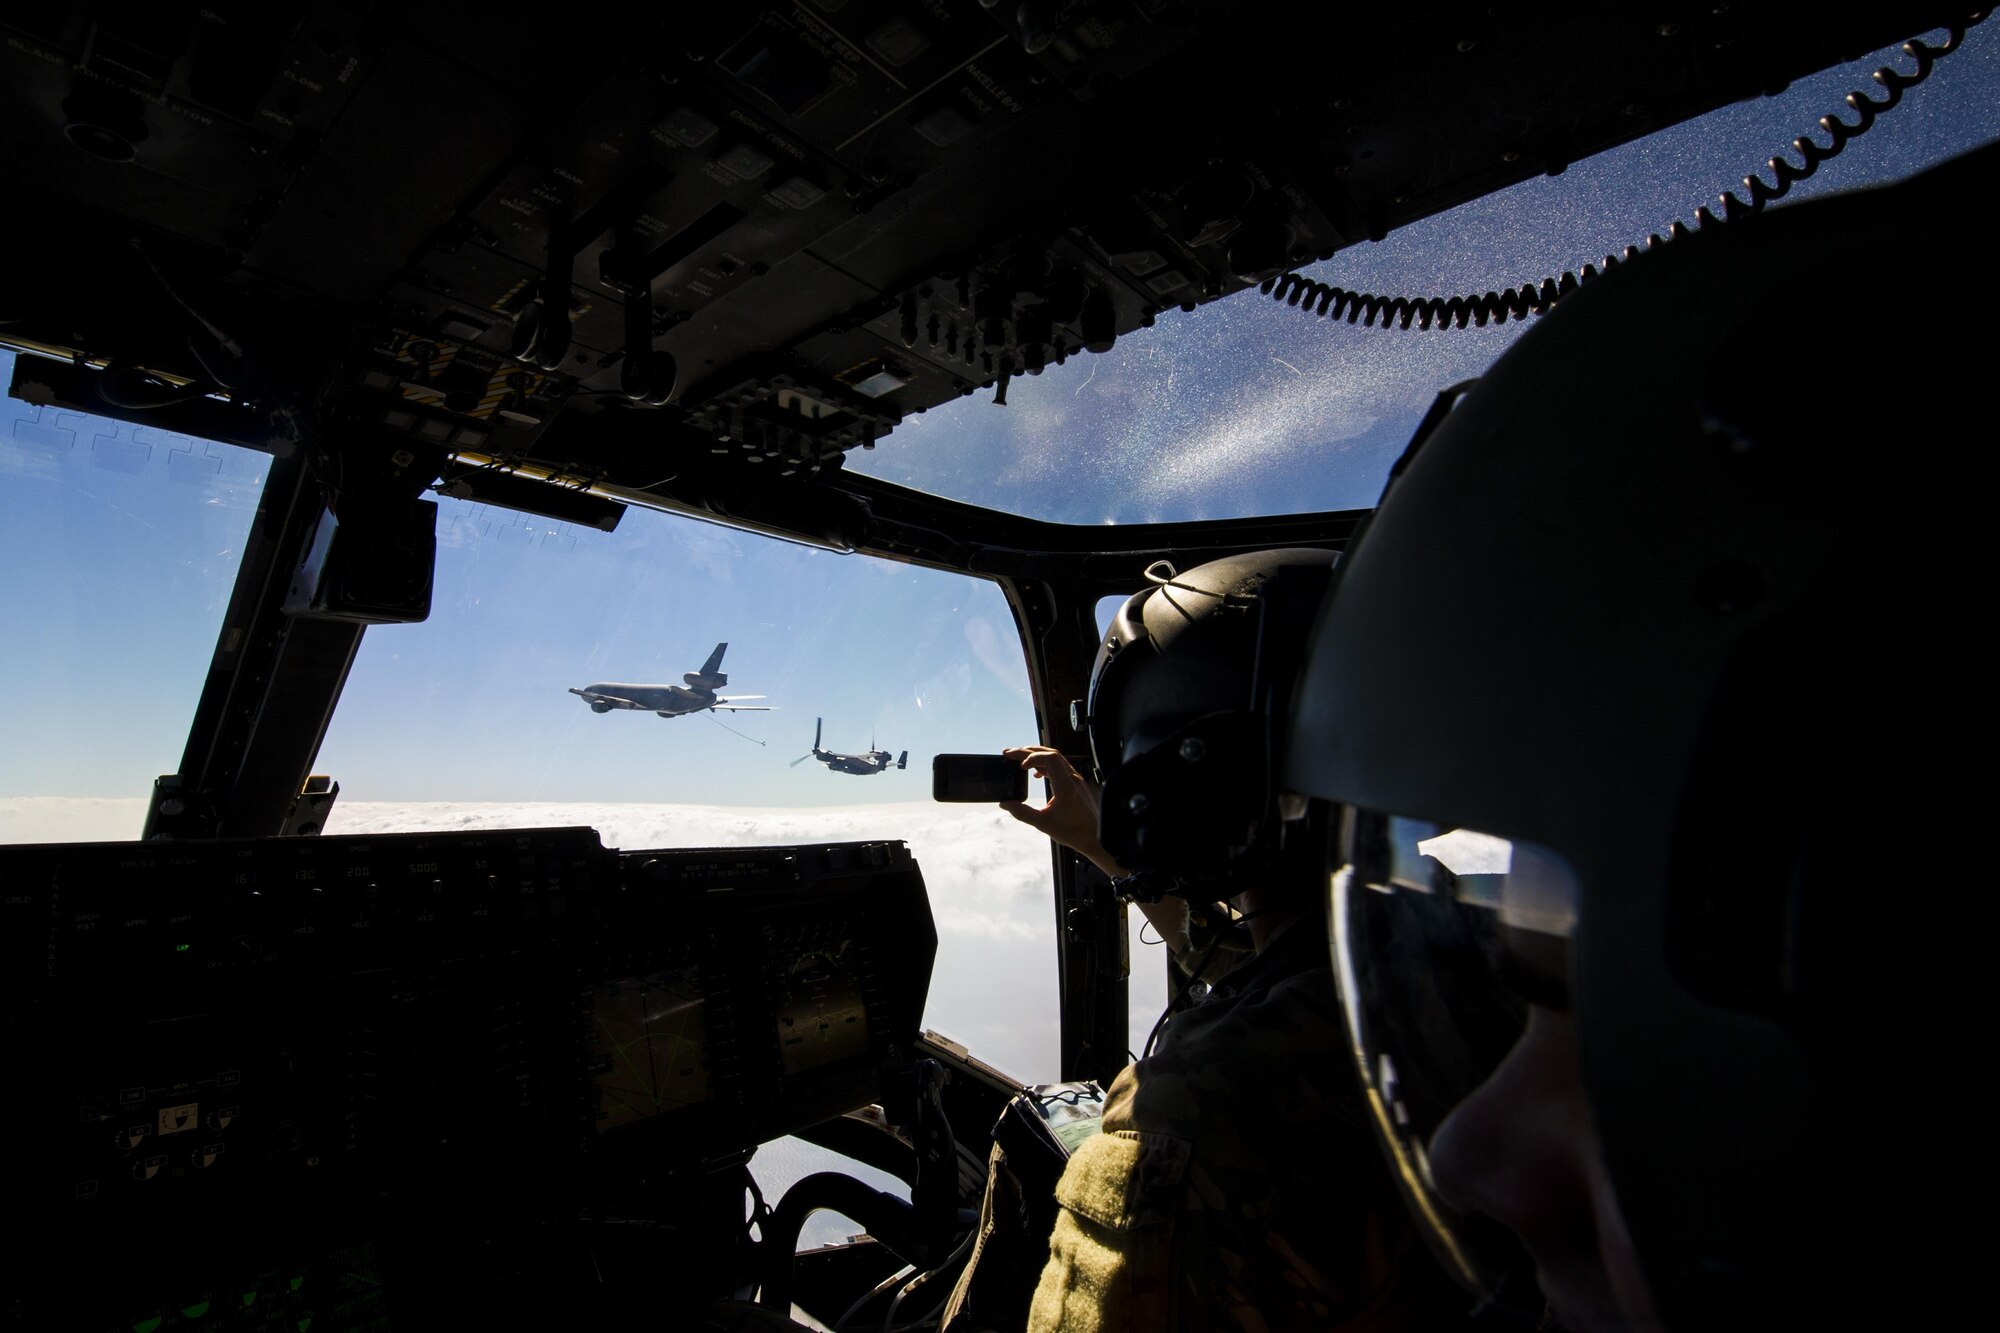 An Air Commando with the 8th Special Operations Squadron observes as a CV-22 Osprey tiltrotor aircraft approaches a KC-10 Extender air-refueling receptacle during a training mission over the Gulf of Mexico, Nov. 18, 2016. The air-refuel mission marked the first time an 8th SOS aircraft has connected to a KC-10. (U.S. Air Force photo by Airman 1st Class Joseph Pick)